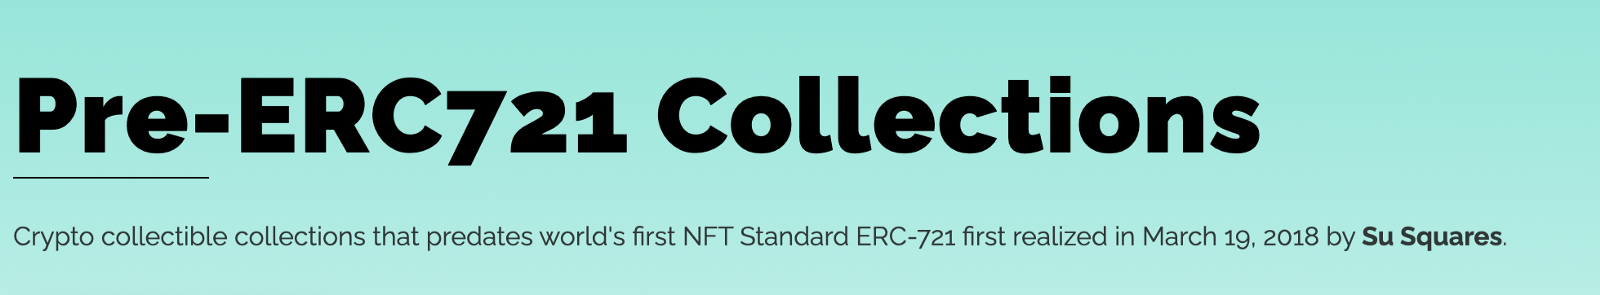 OldNFT.com is a database of ALL Pre-ERC721 NFTs